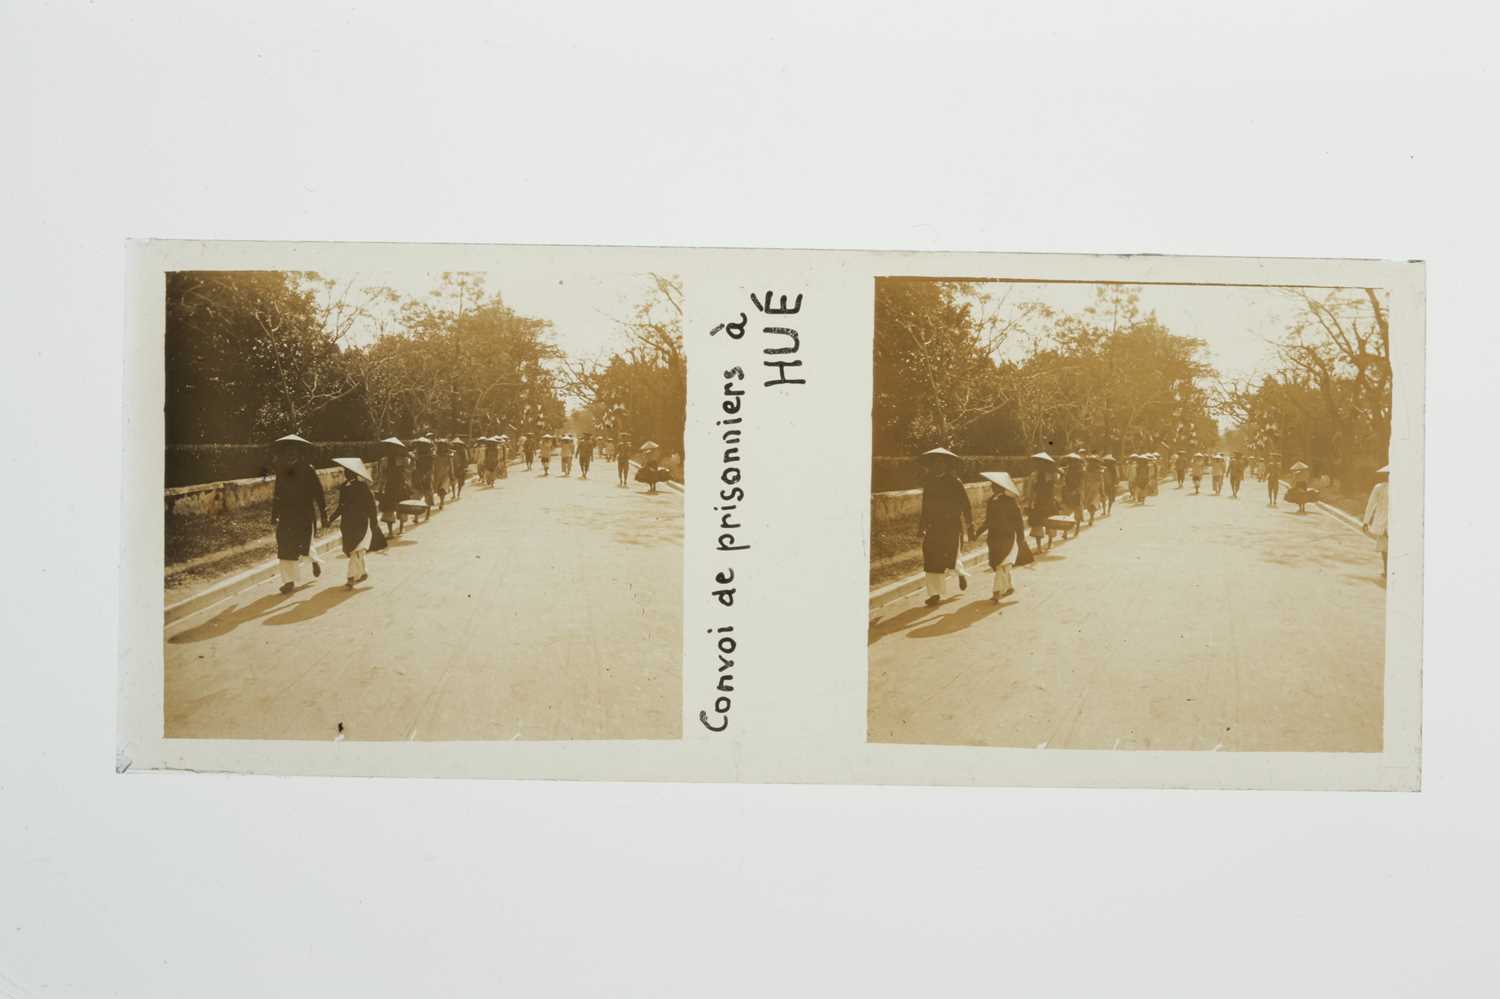 Lot 45 - An Important Stereo Archive of Turn of the Century French Colonial Ha Giang, Indochina, Part 2